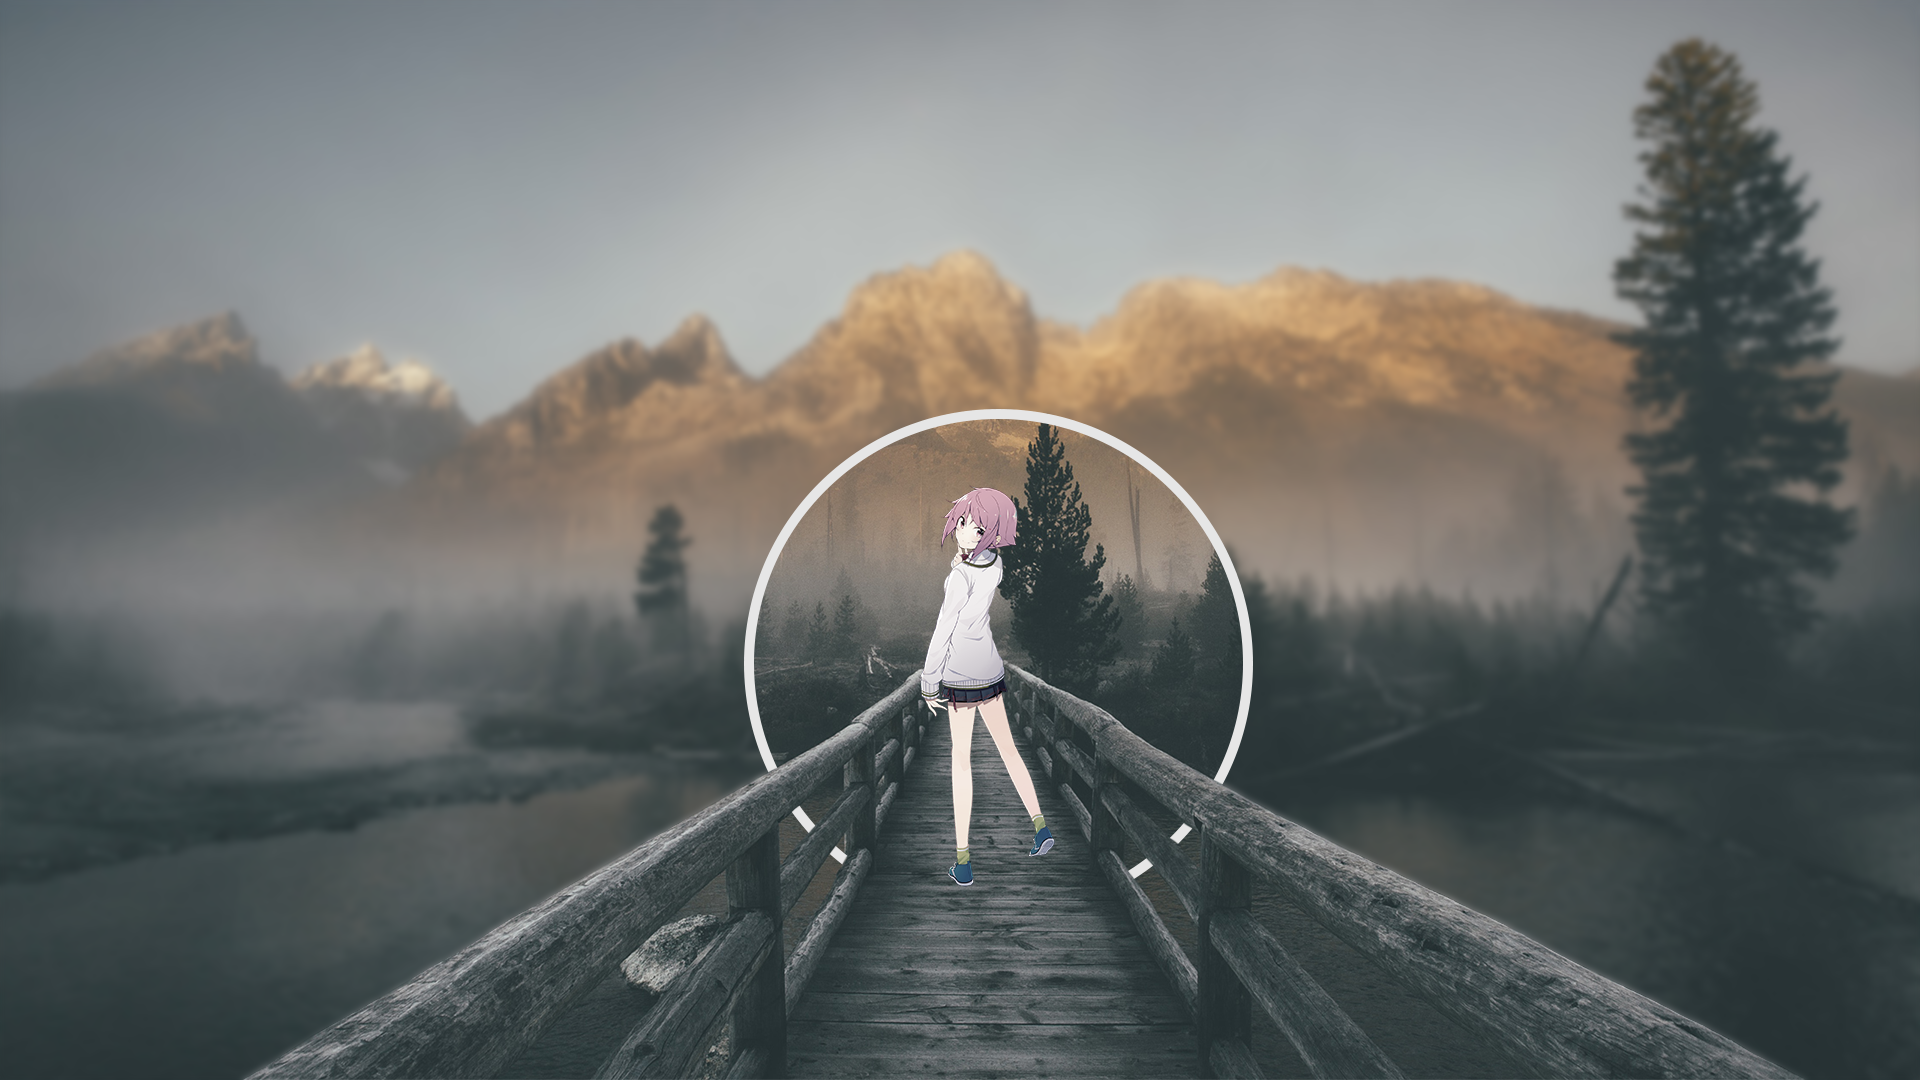 Anime 1920x1080 anime girls anime nature blurred desaturated